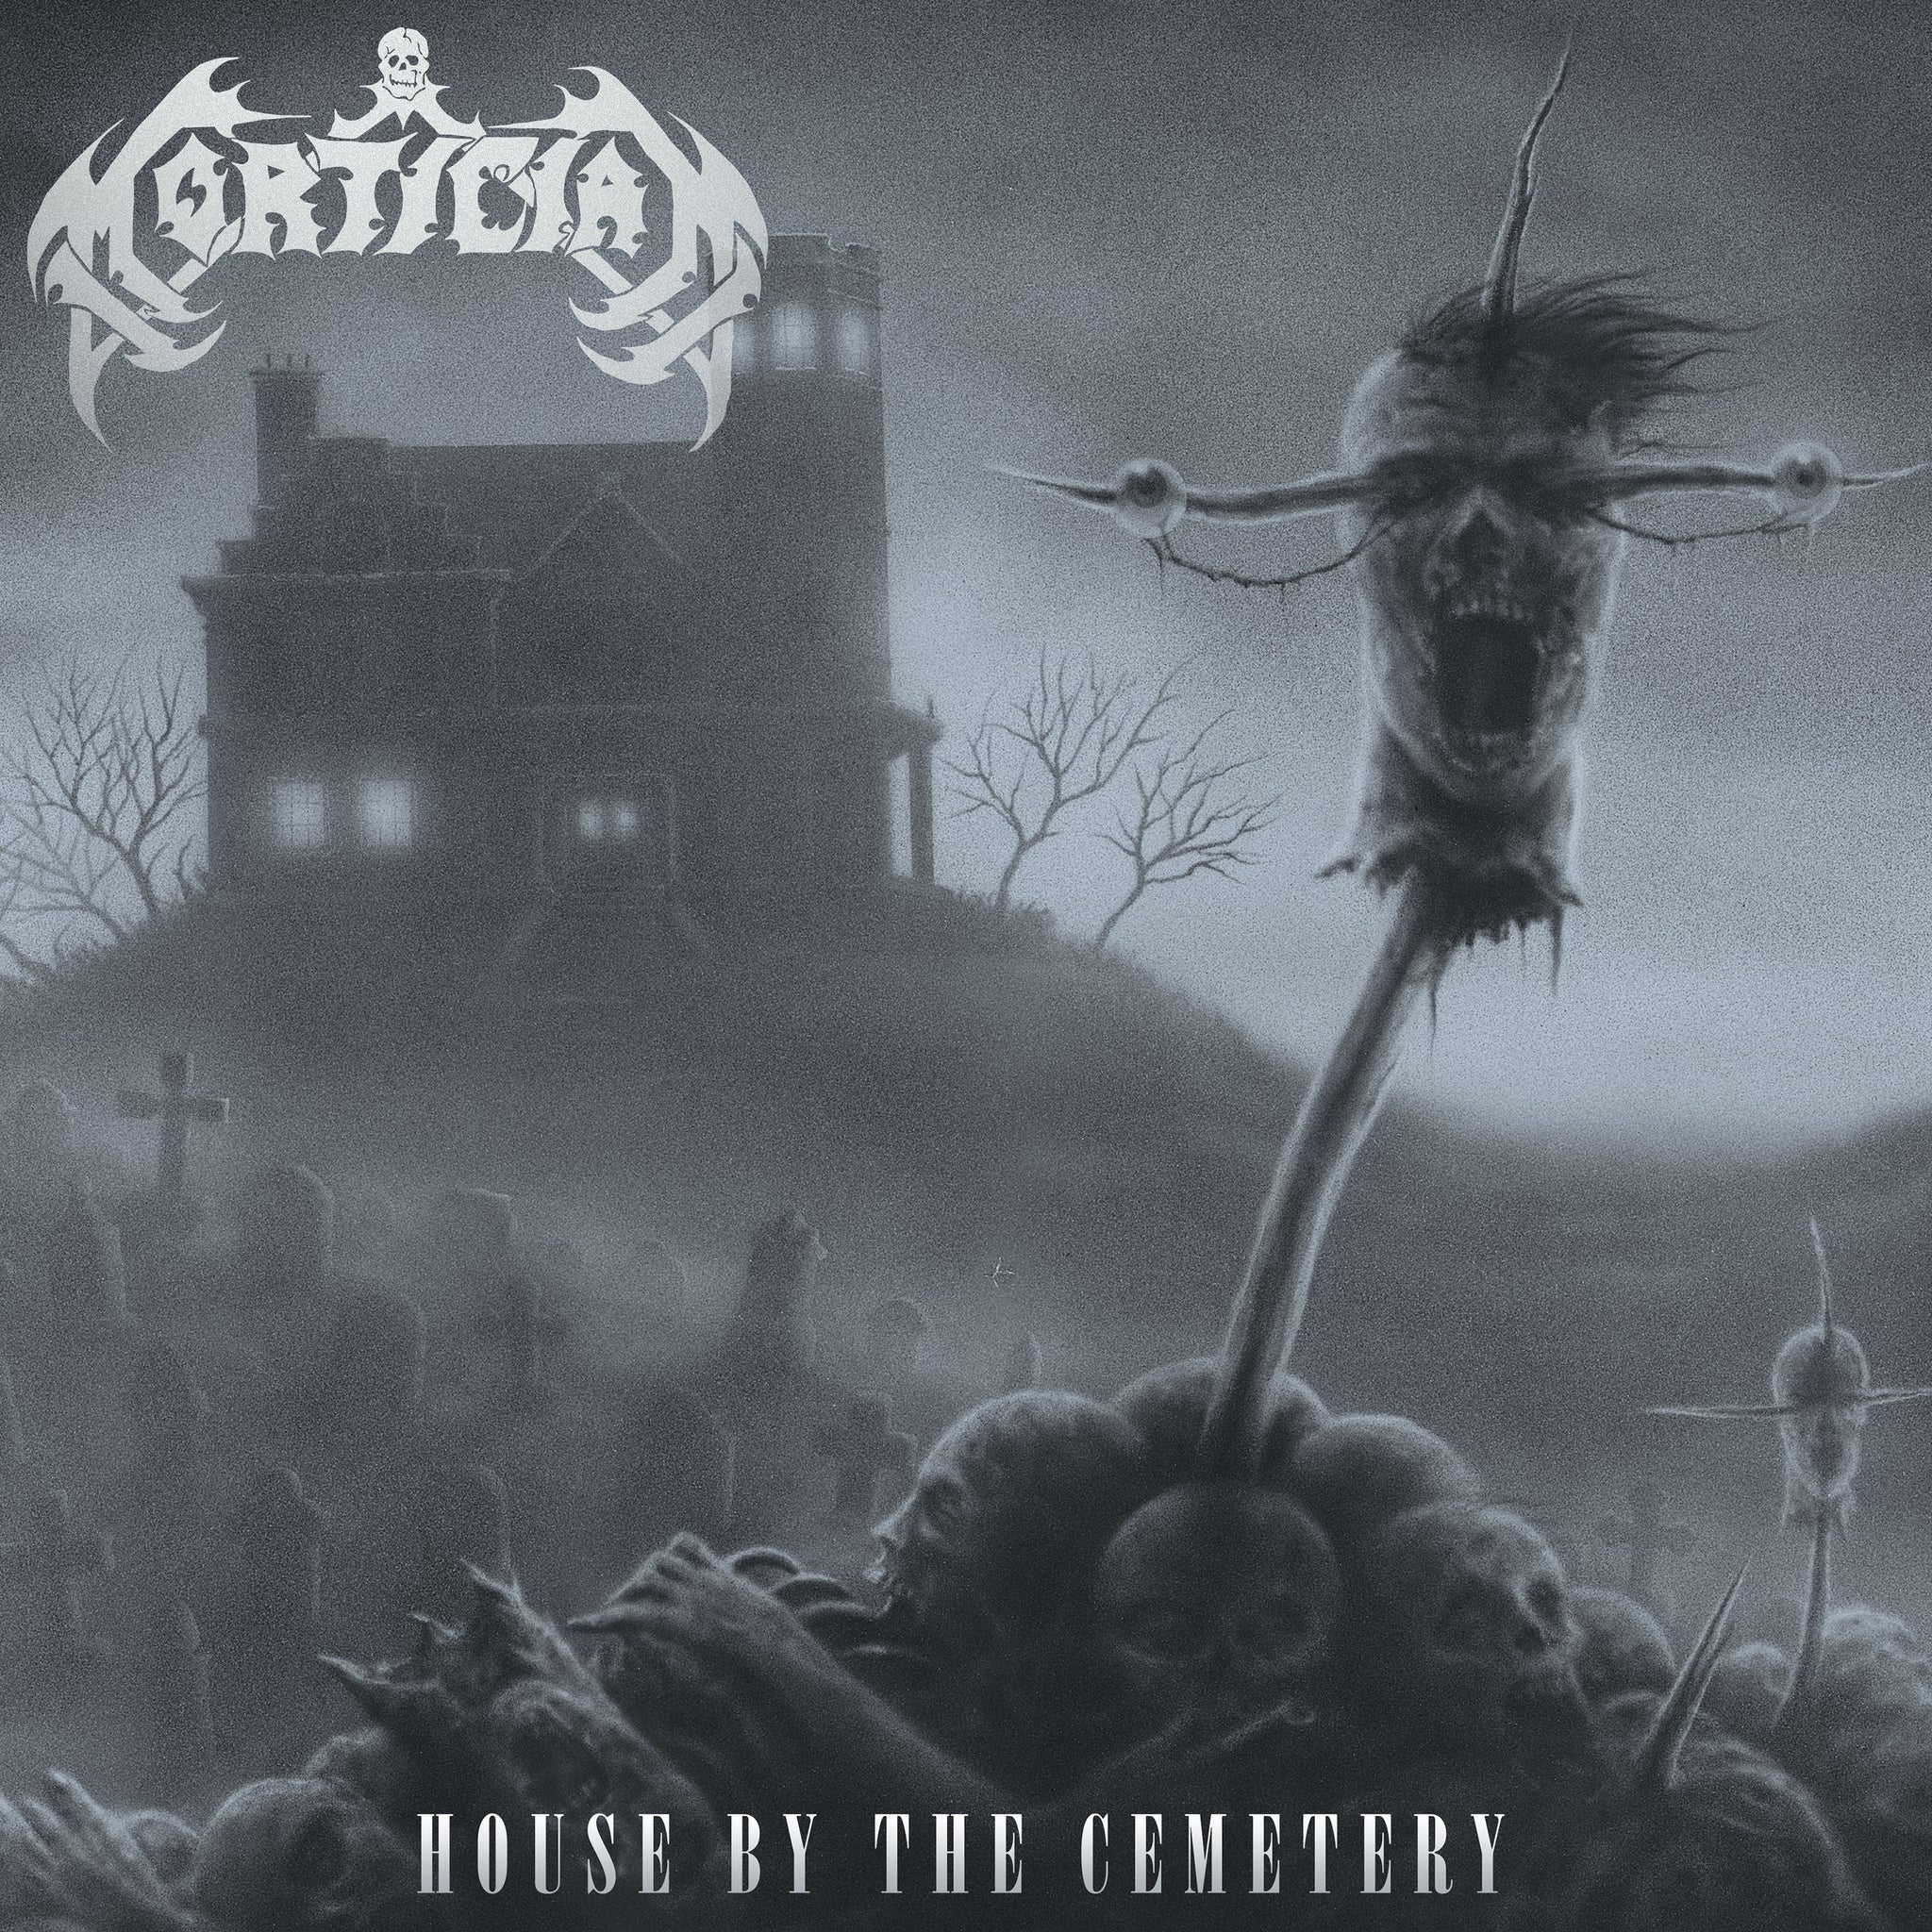 Mortician "House By The Cemetery" LP